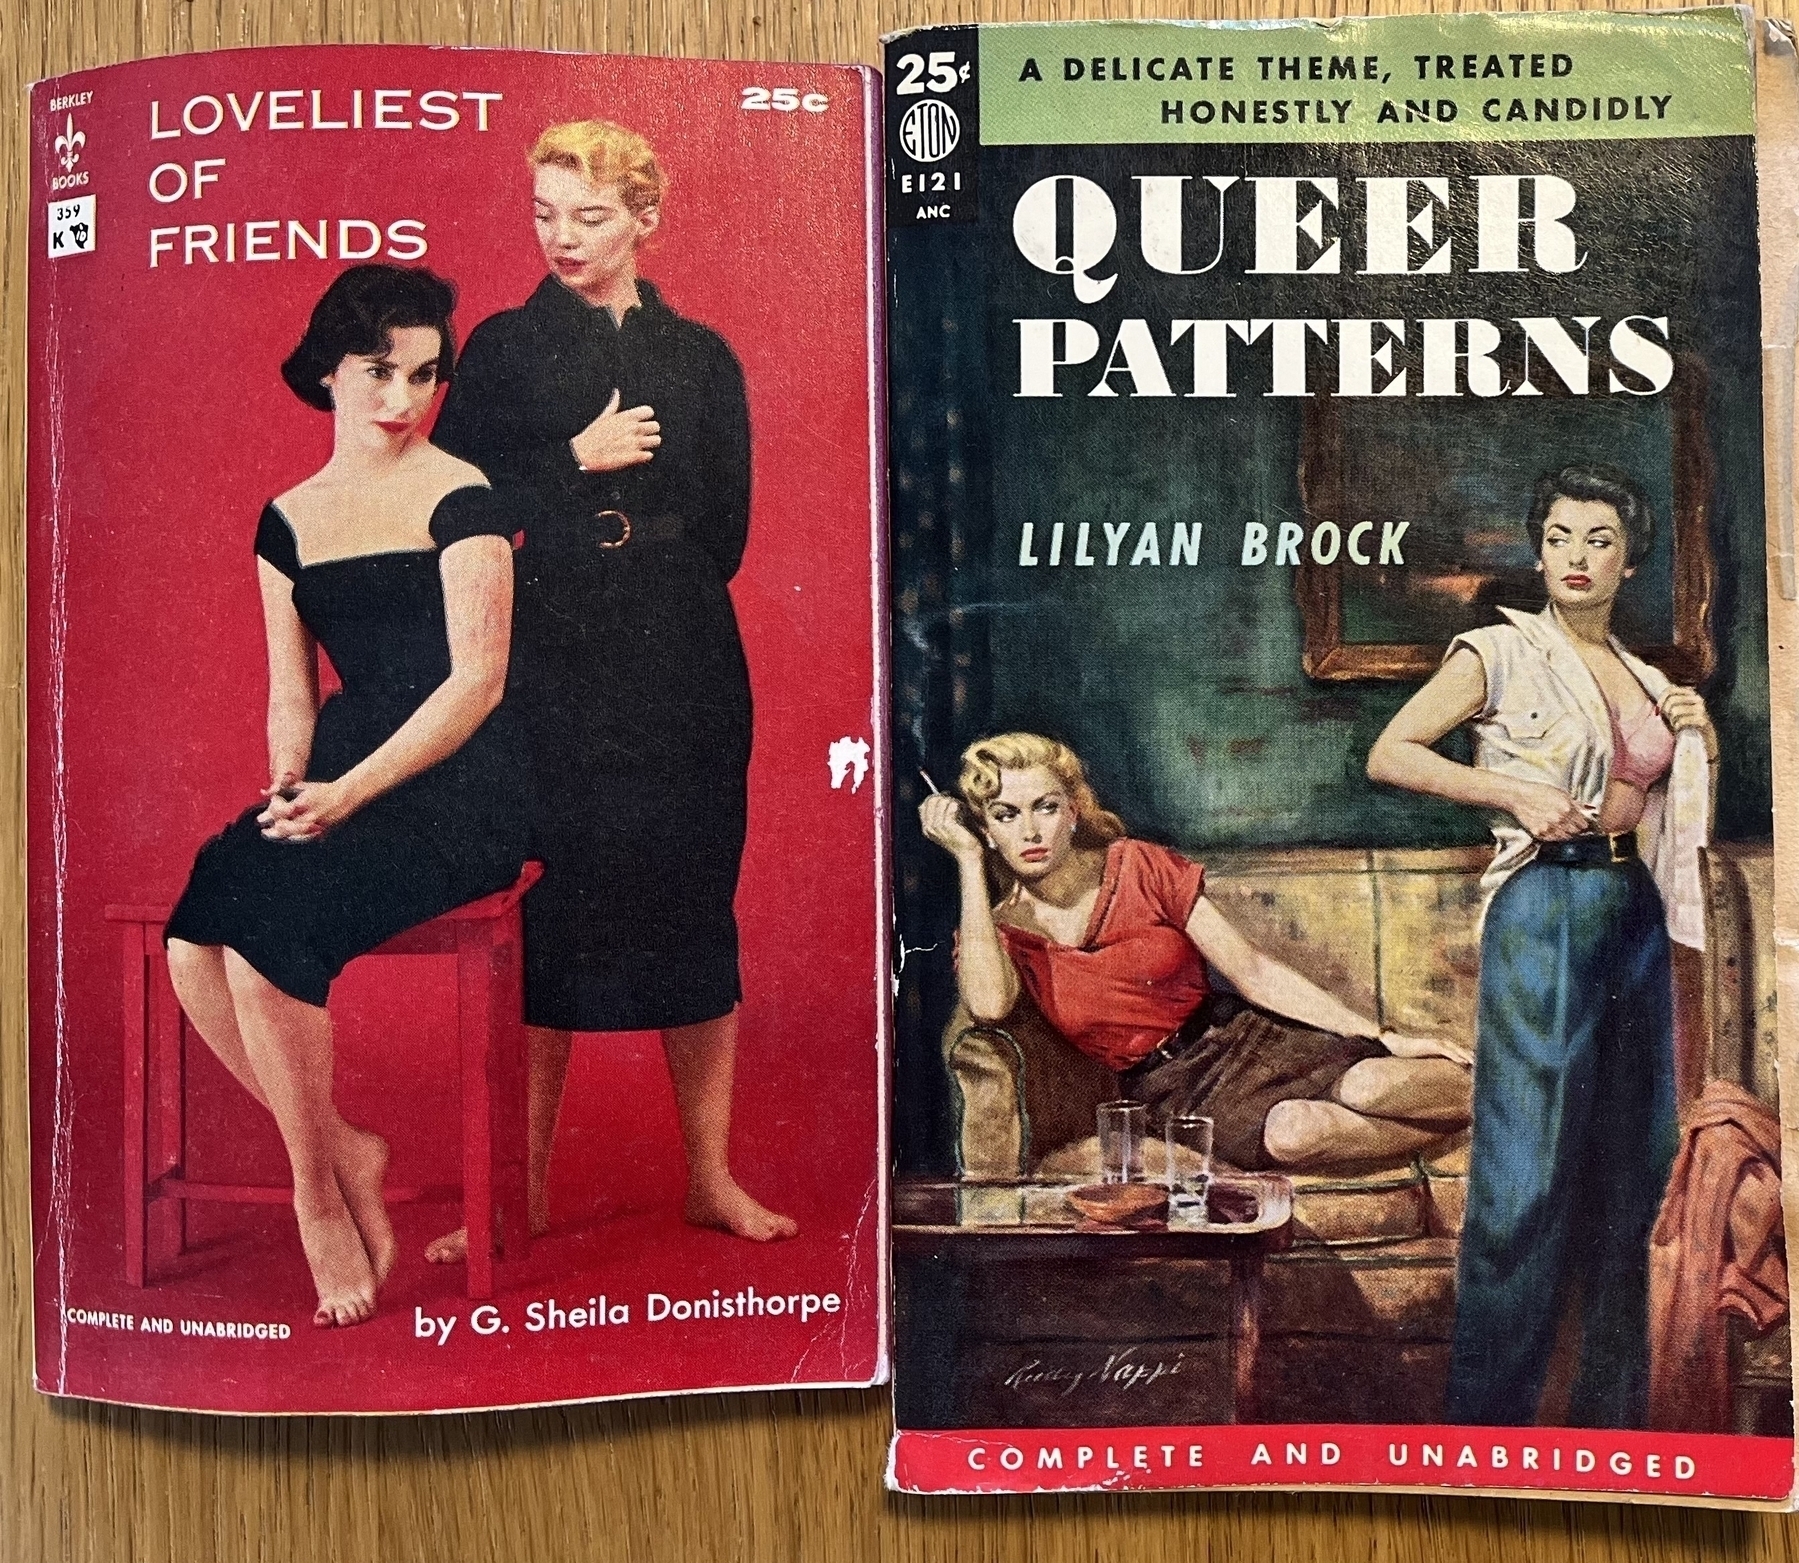 Two old pulp paperbacks. The first is titled “The Loveliest of Friends: complete and unabridged” by G. Sheila Donisthorpe and features a pair of women that probably don’t have a platonic relationship. The second is titled “Queer Patterns: a delicate theme treated honestly and candidly” by Lilyan Brock. Again “complete and unabridged”. It features two women. One is lounging on the sofa, smoking.